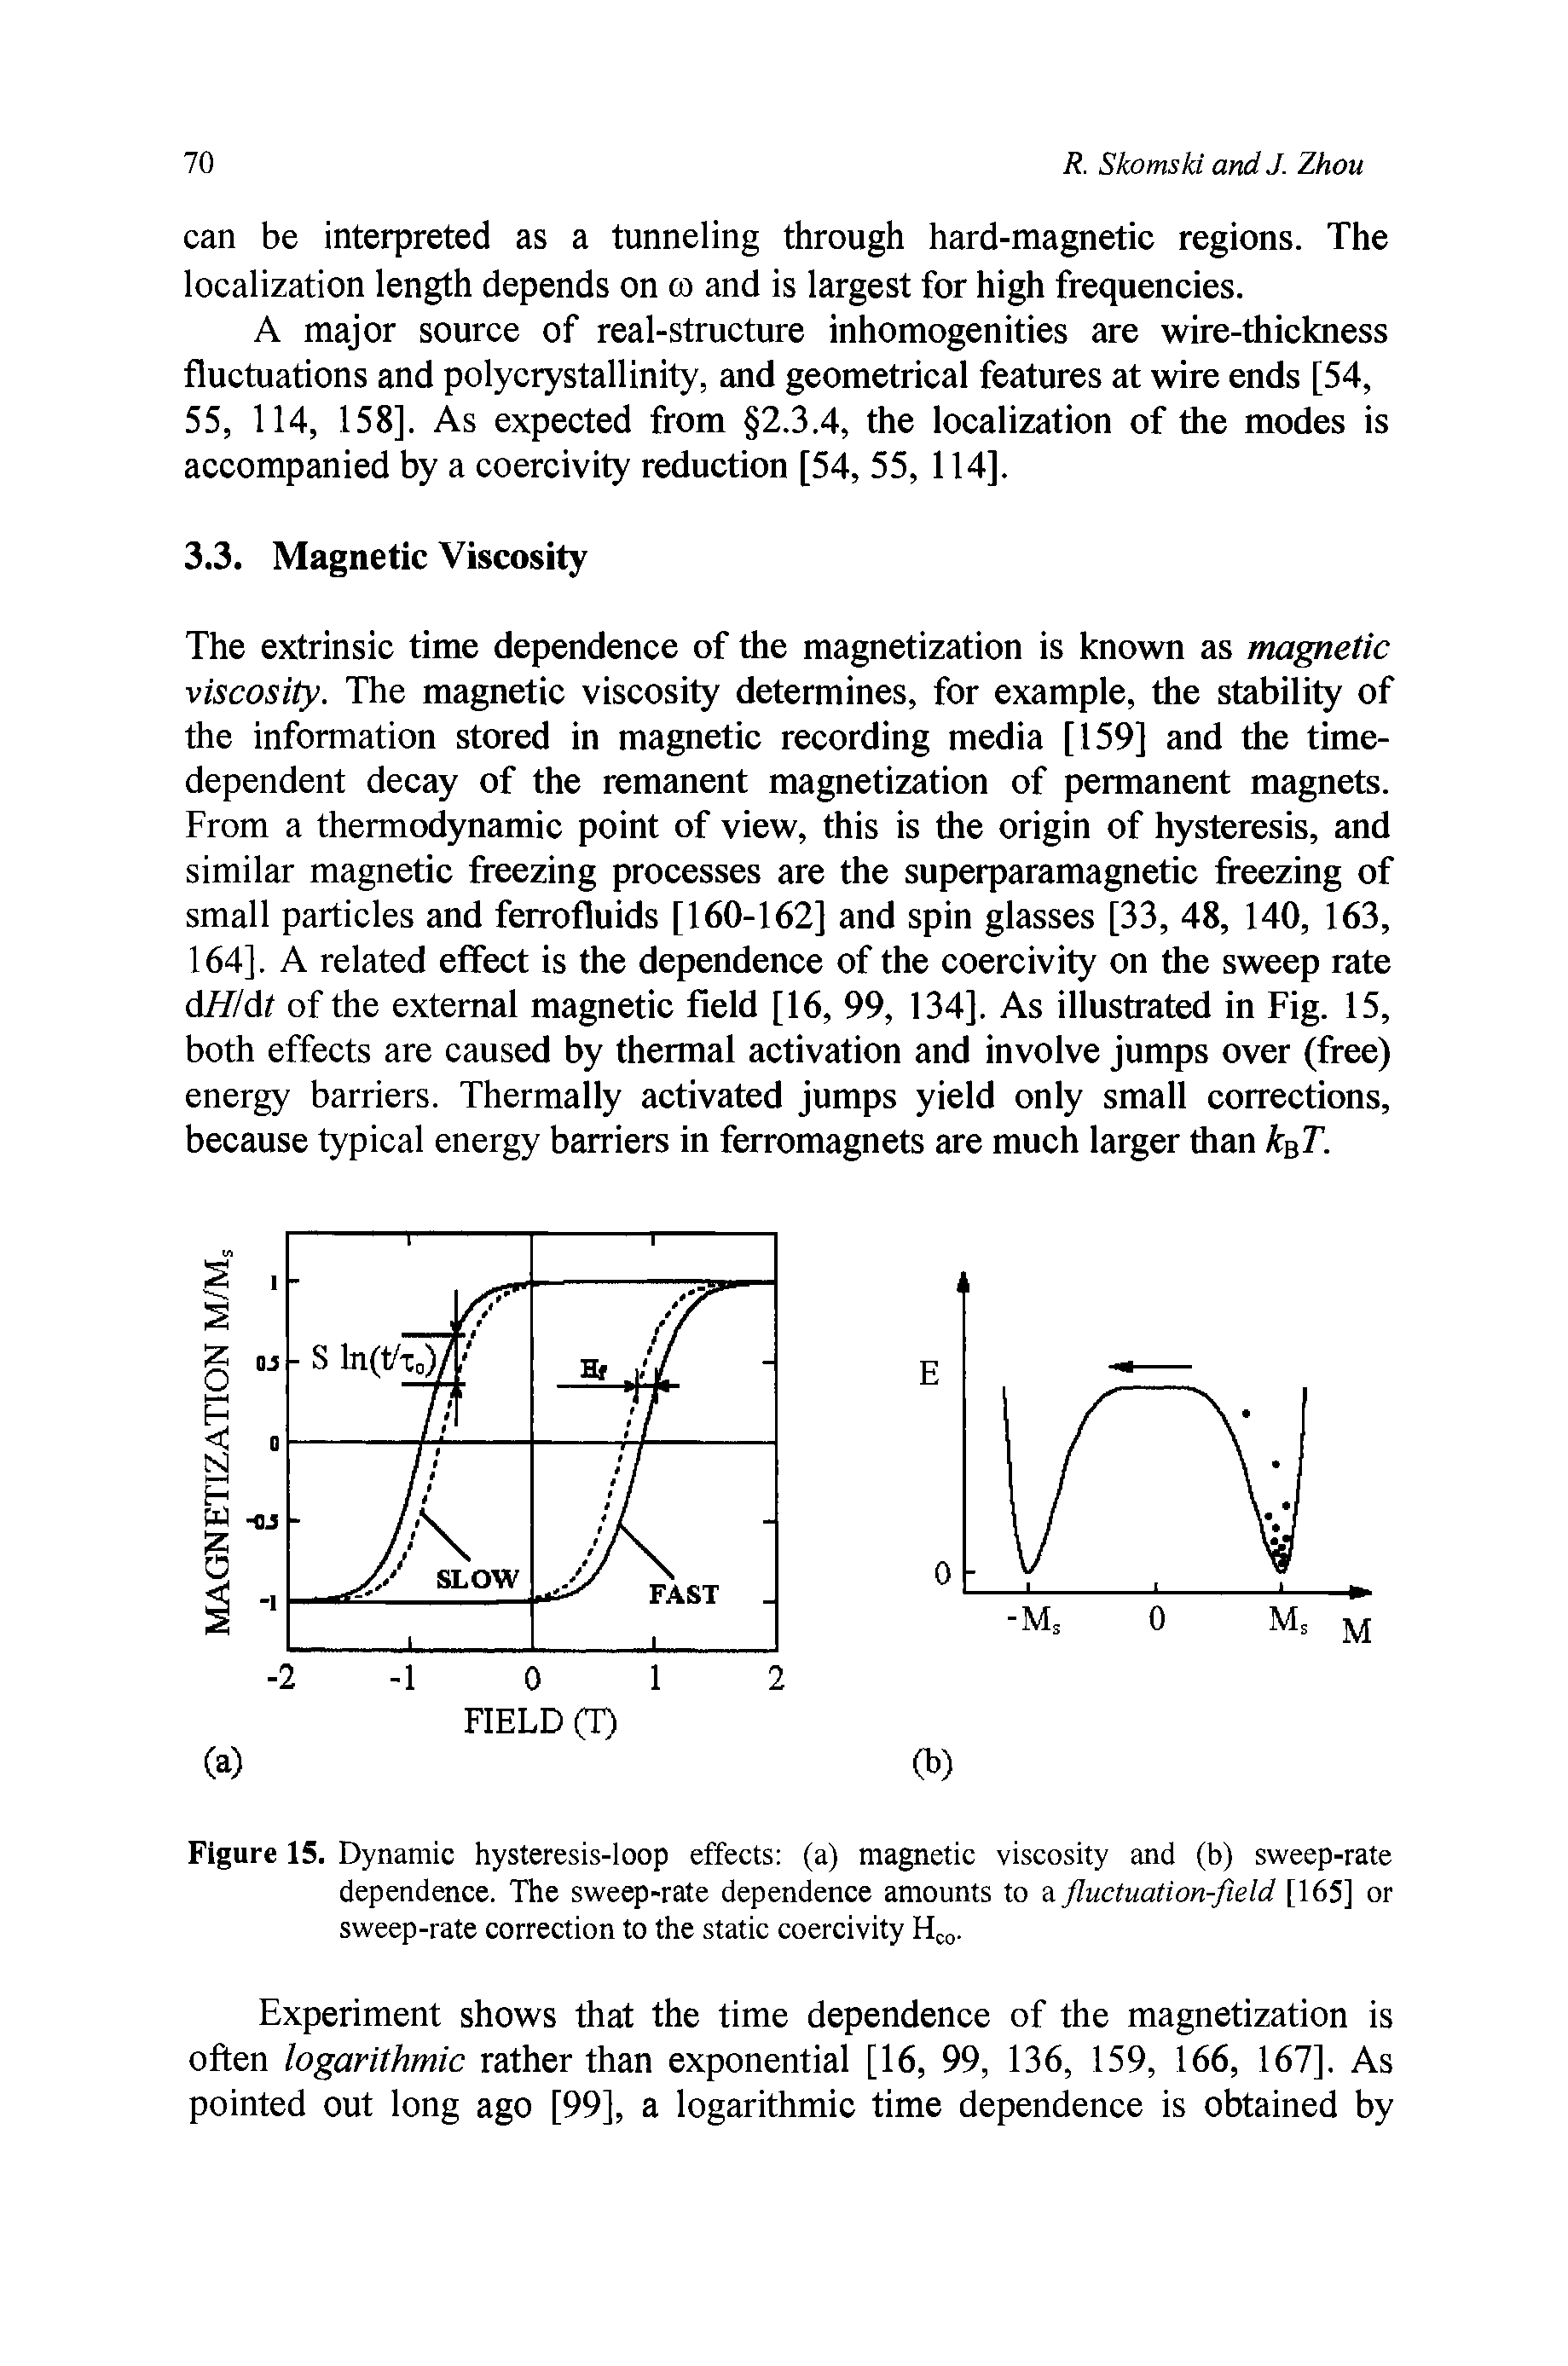 Figure 15. Dynamic hysteresis-loop effects (a) magnetic viscosity and (b) sweep-rate dependence. The sweep-rate dependence amounts to a fluctuation-field [165] or sweep-rate correction to the static coercivity Hco.